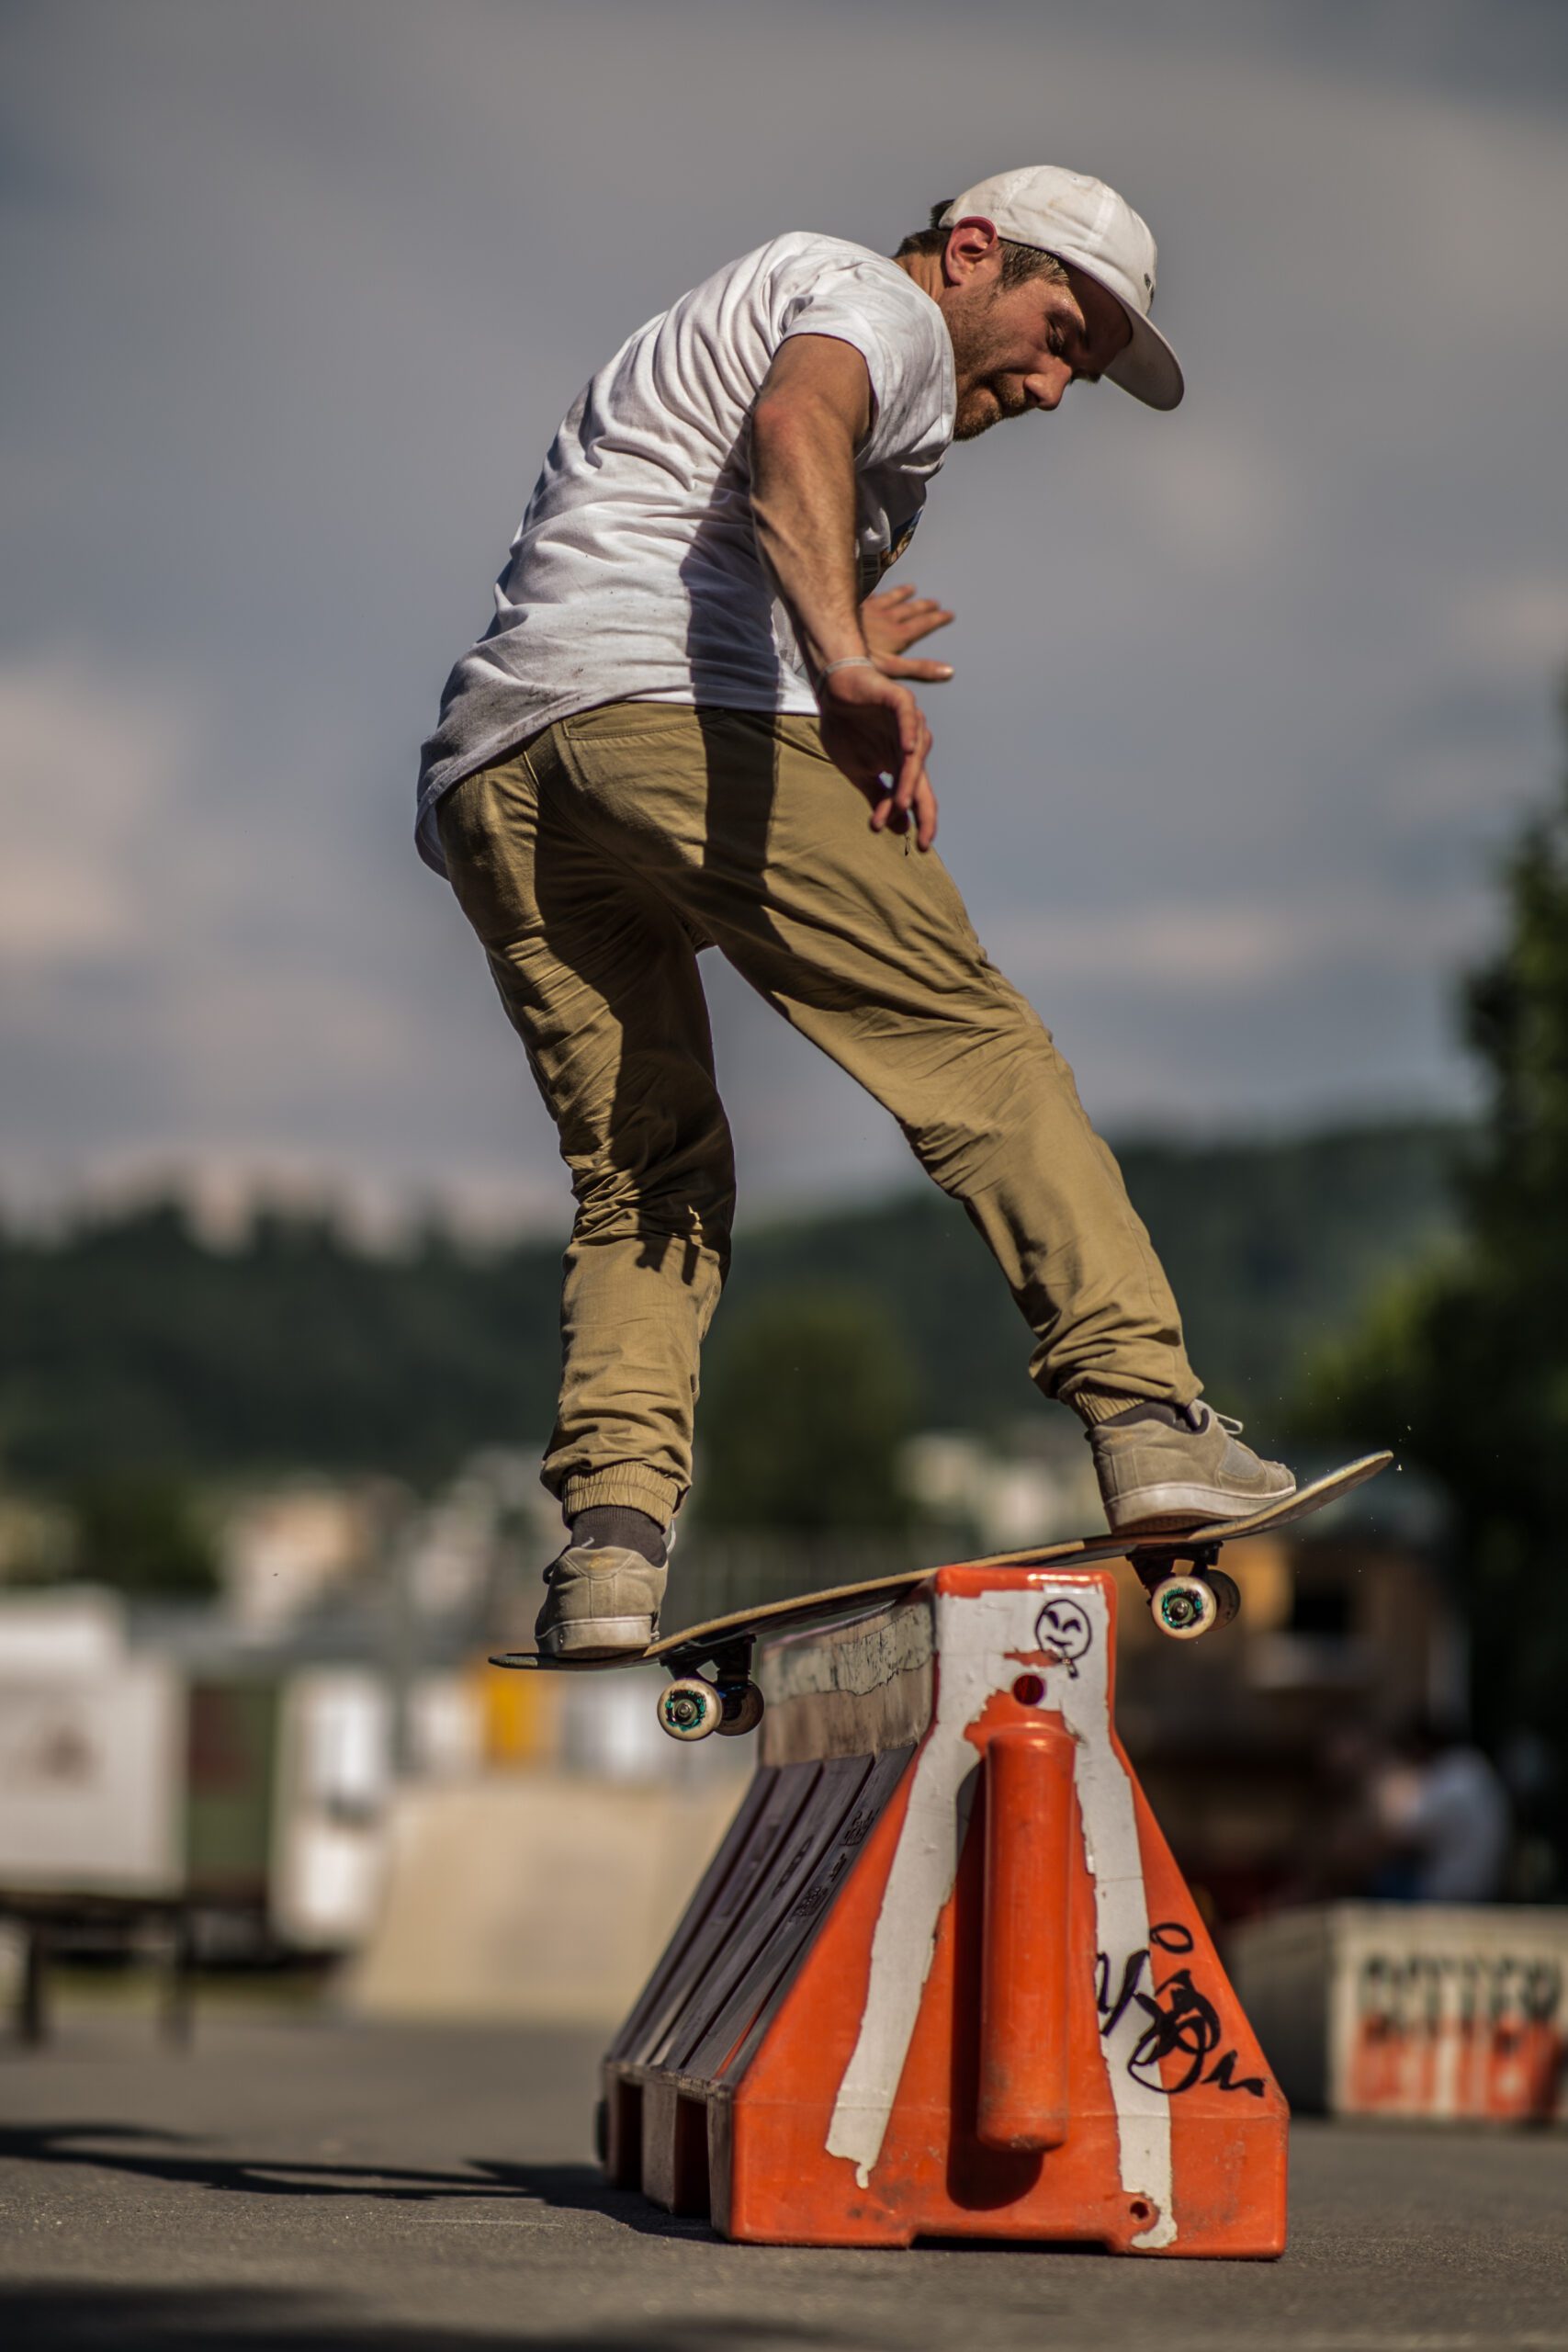 How Do You Improve Your Ability To Carve And Turn On A Skateboard?